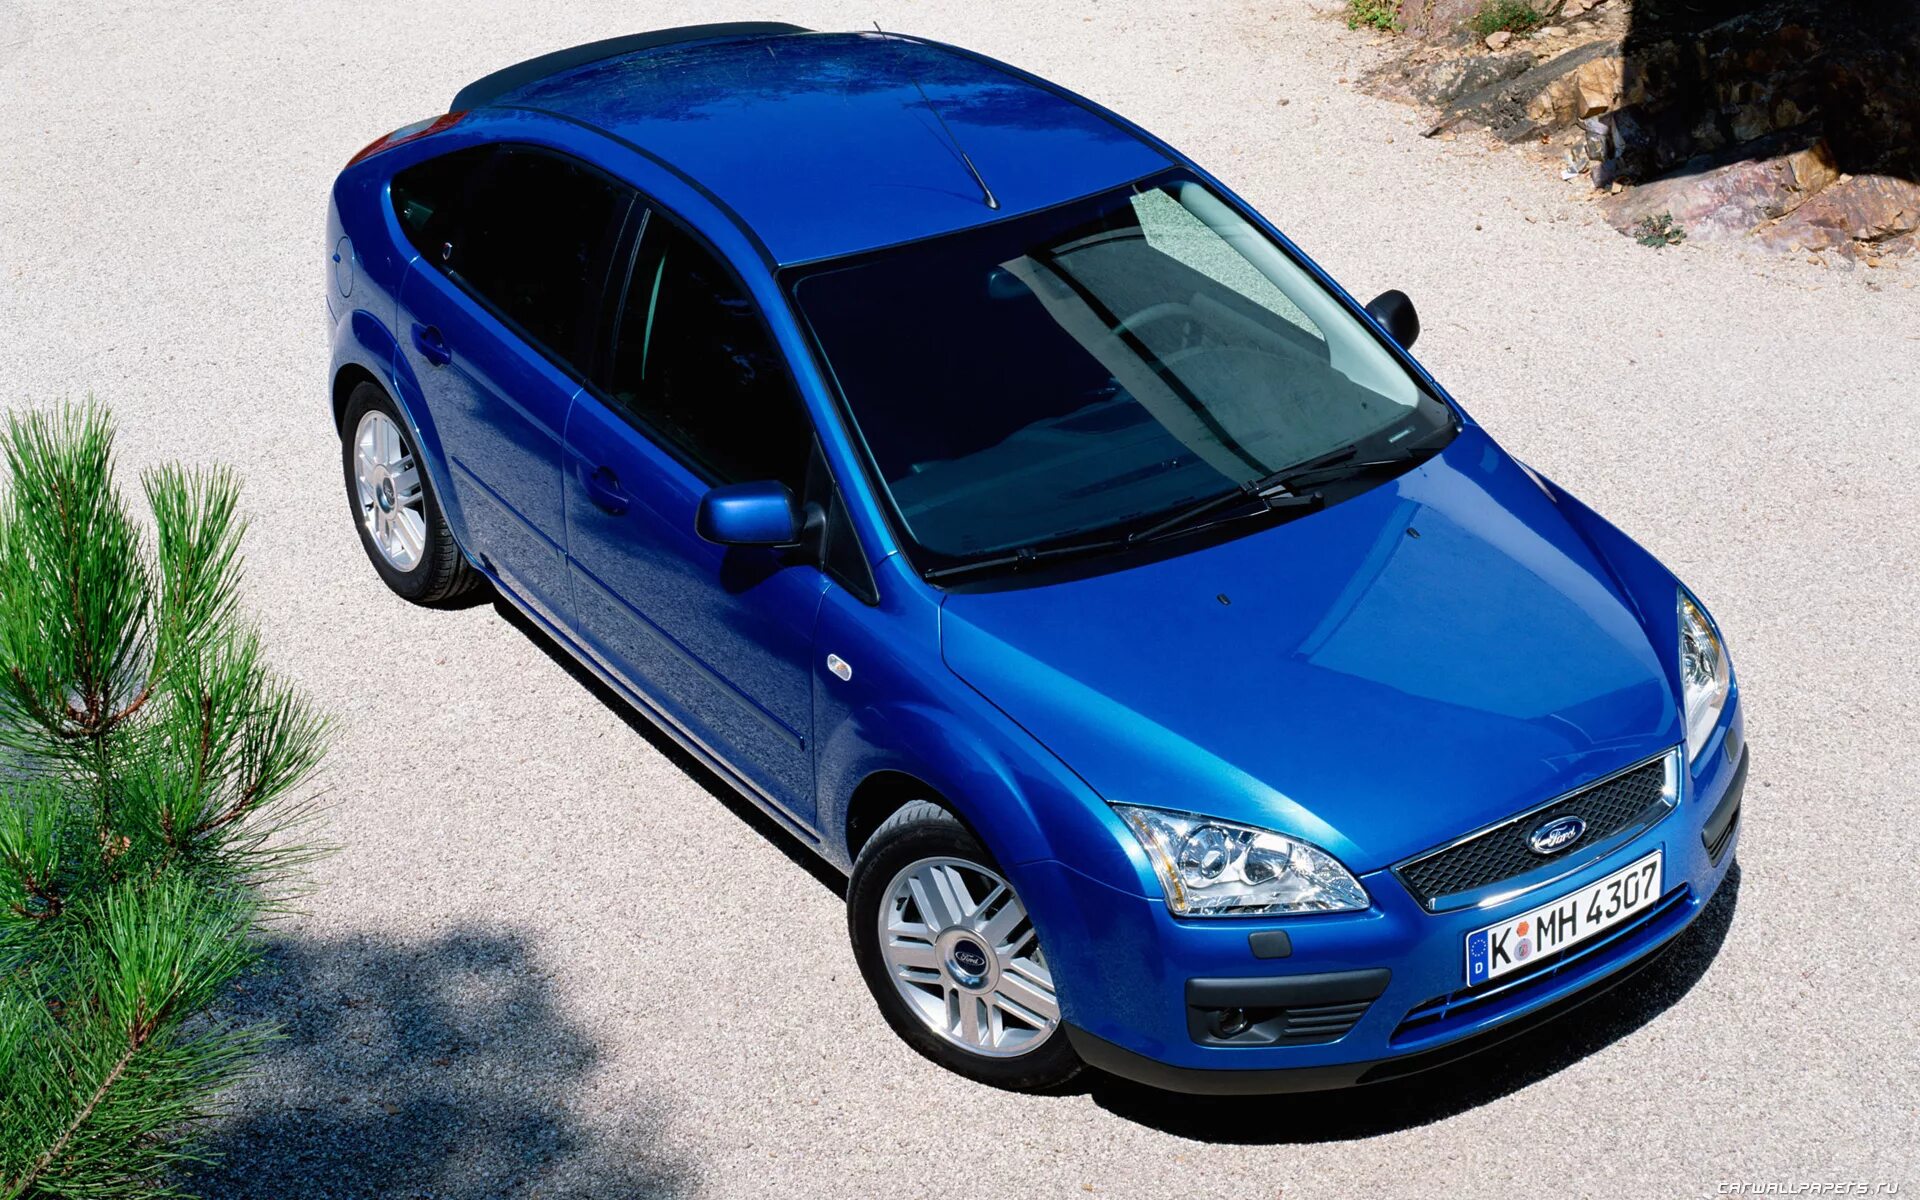 Ford focus цвет. Форд фокус 2. Форд фокус 2007 хэтчбек 1.4. Форд фокус 2.5. Ford Focus 2 2004-2011.